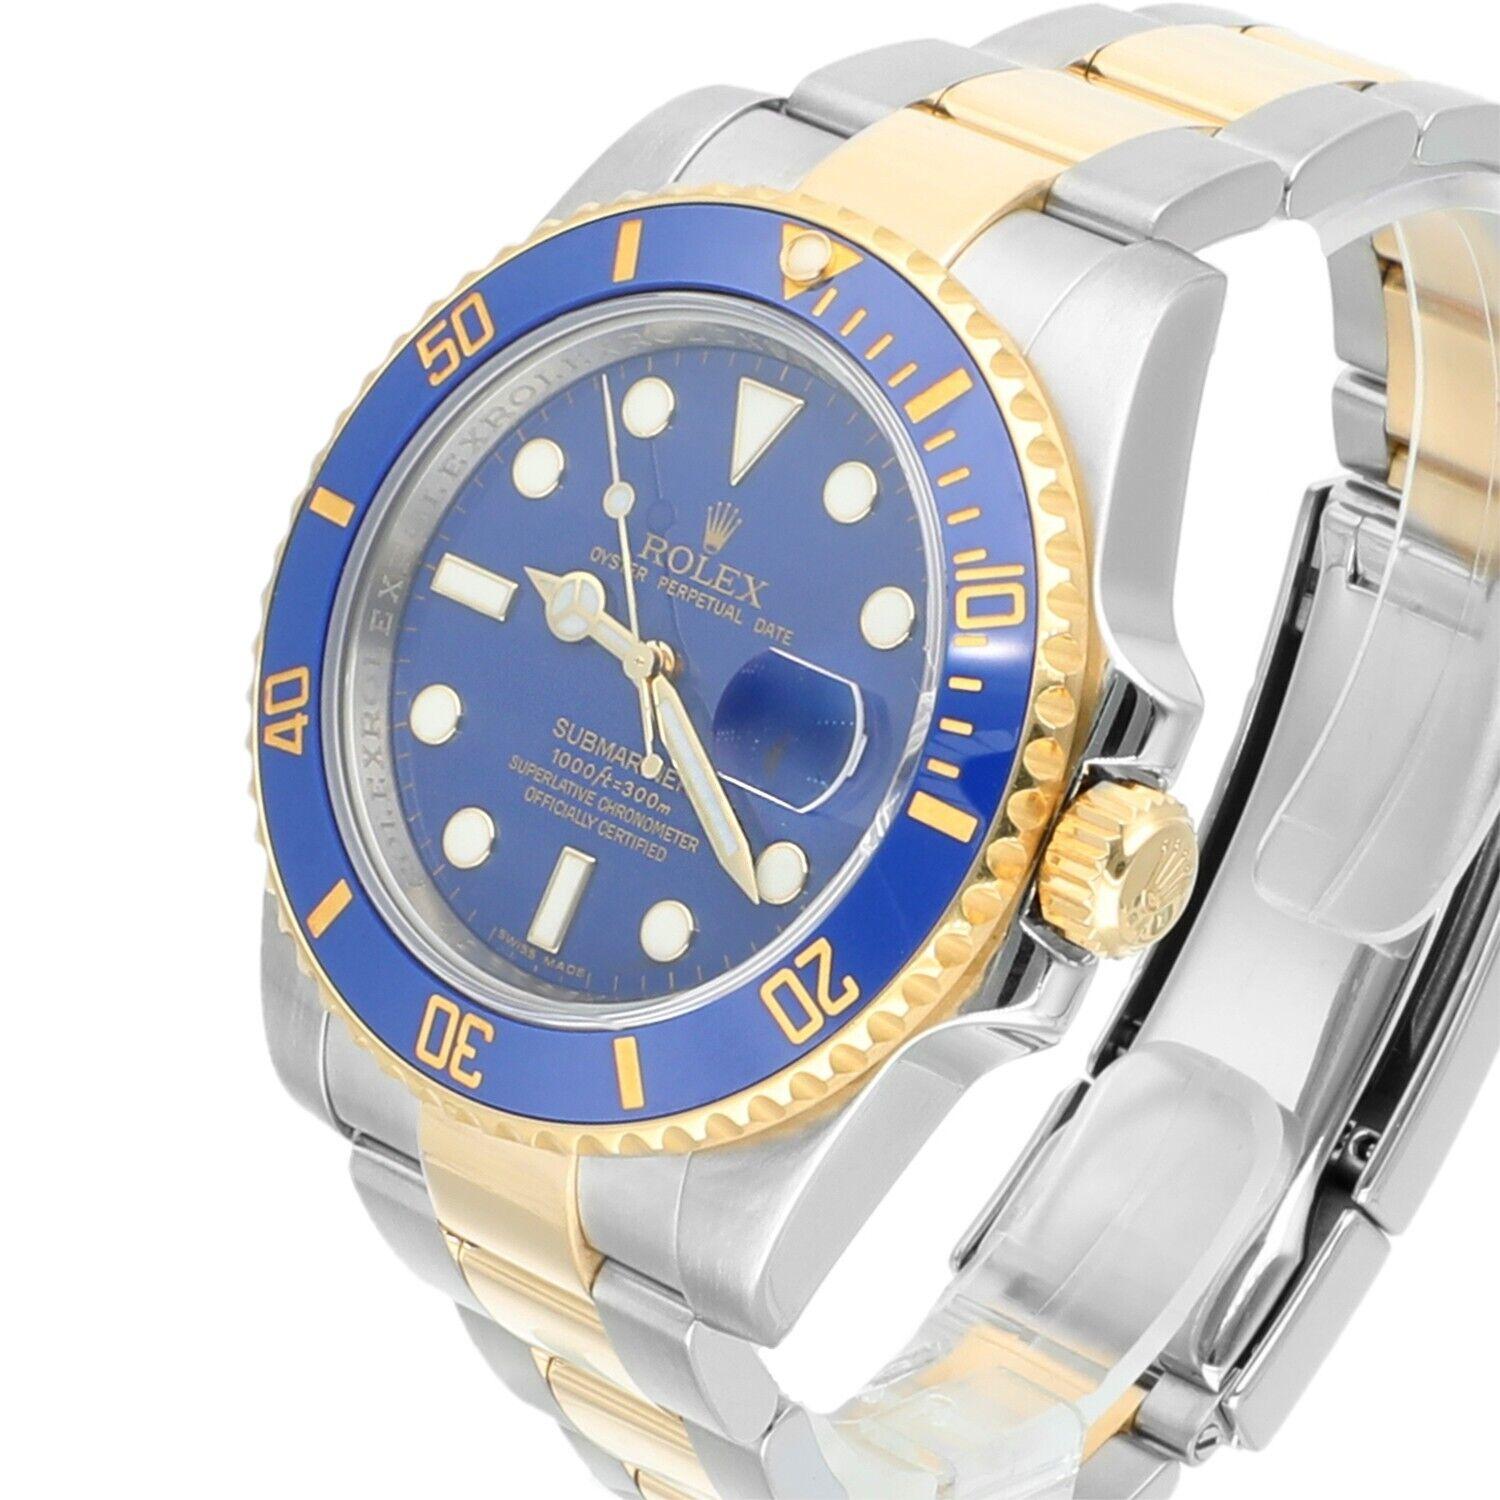 Rolex Submariner Date 116613LB Ceramic Bezel Yellow Gold/Stainless Steel Watch In Excellent Condition For Sale In New York, NY